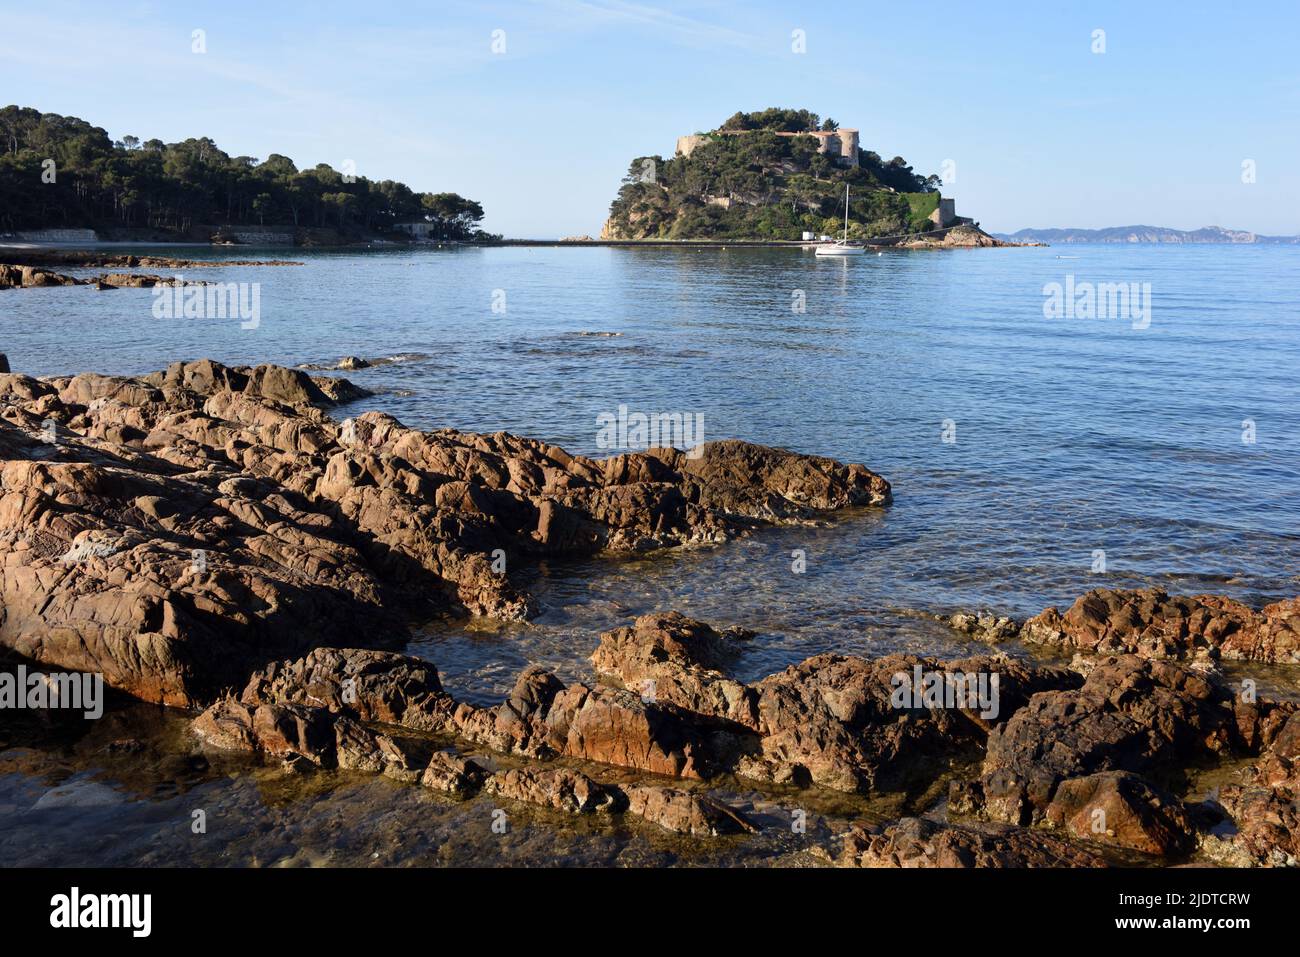 Rocky Coast, Rocks, Shore or Shoreline in front of the Island and Fort of Bregançon Bormes-les-Mimosas Var Provence France Stock Photo